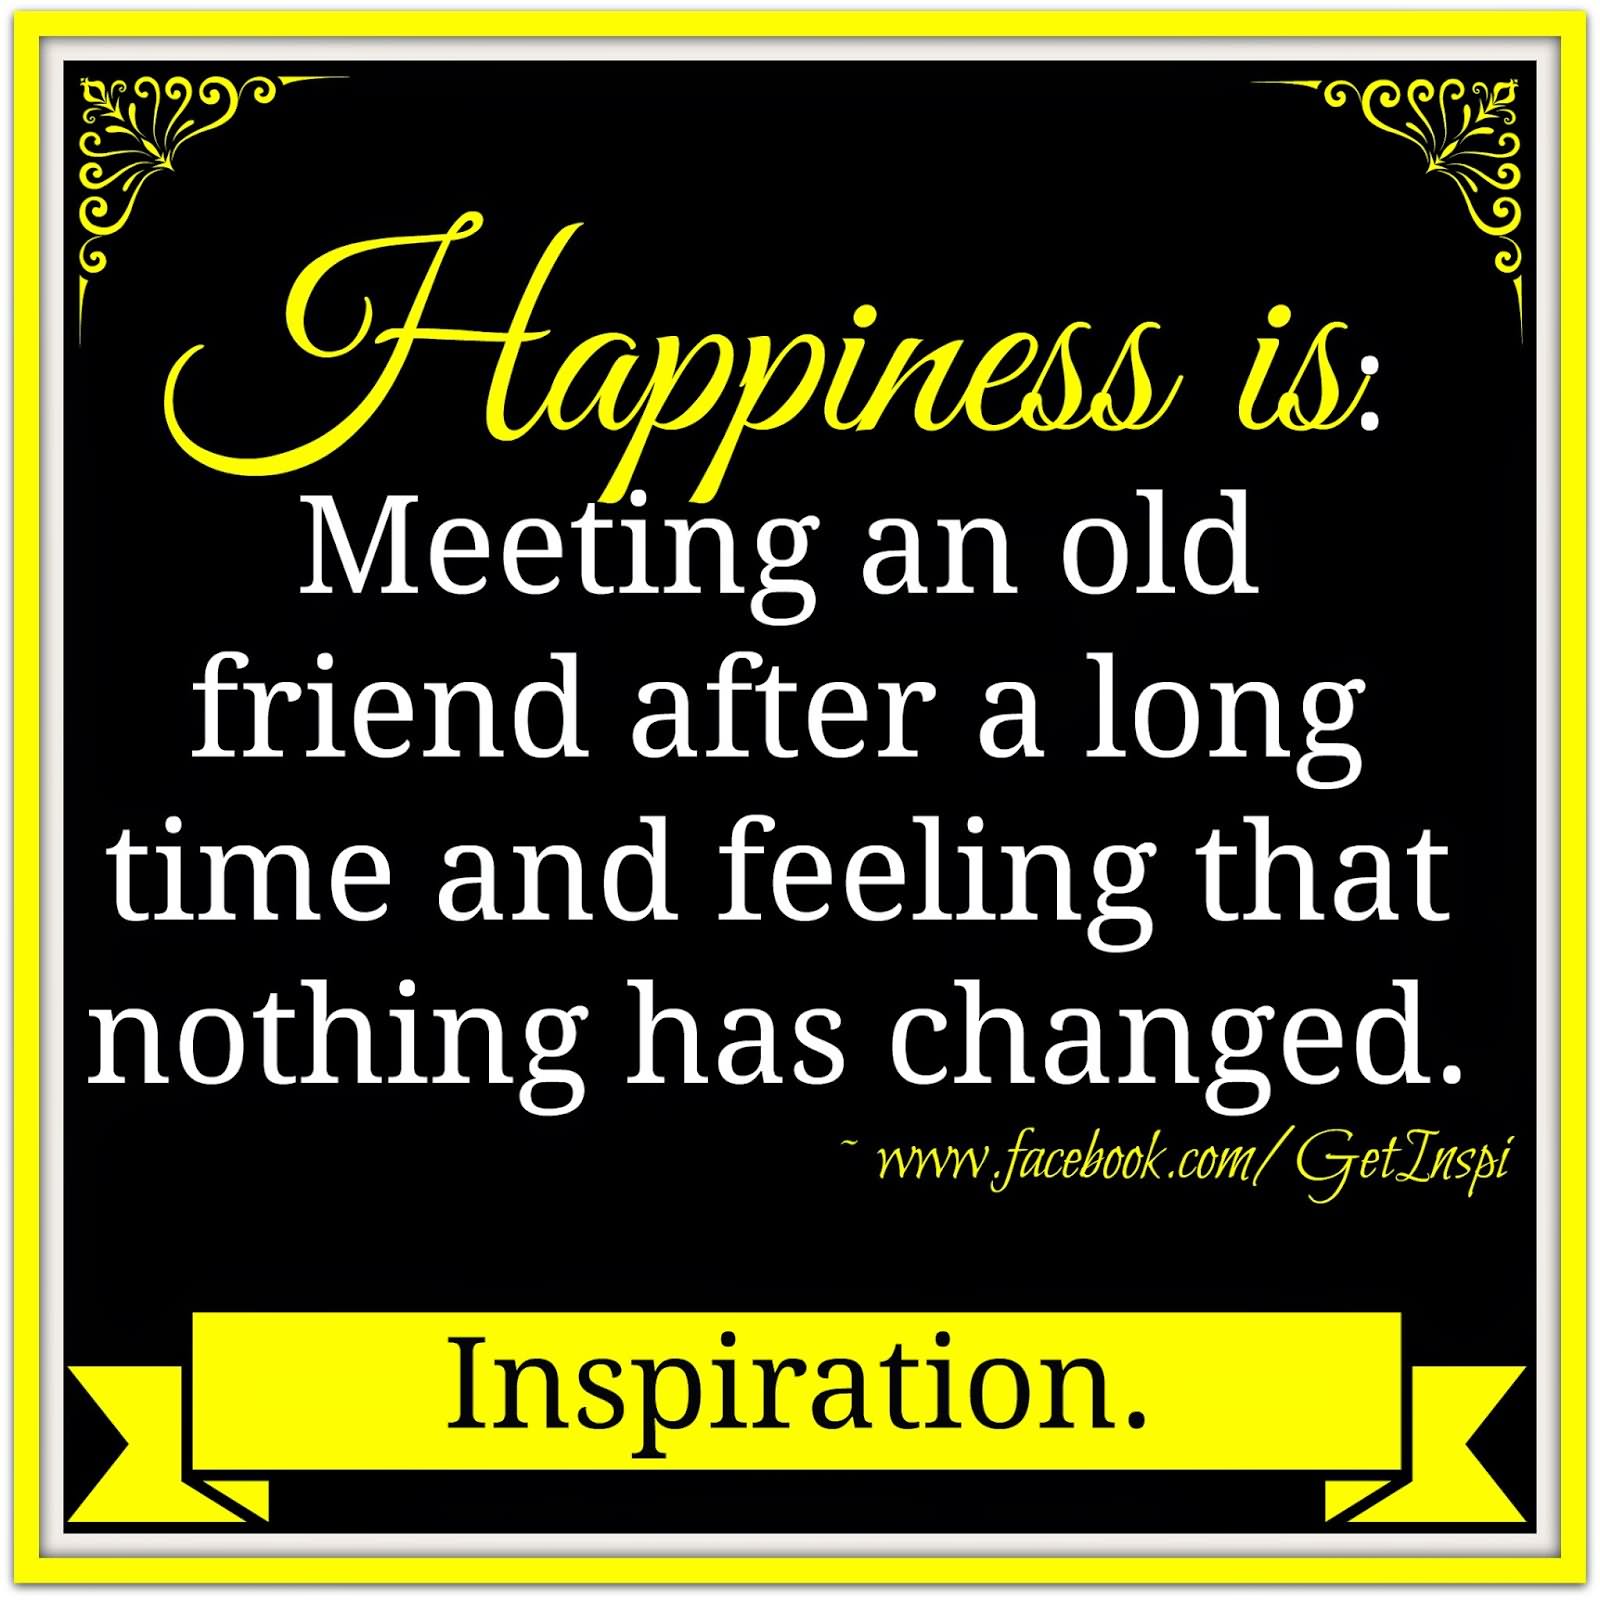 Happiness is meeting an old friend after a long time and feeling that nothing has changed.